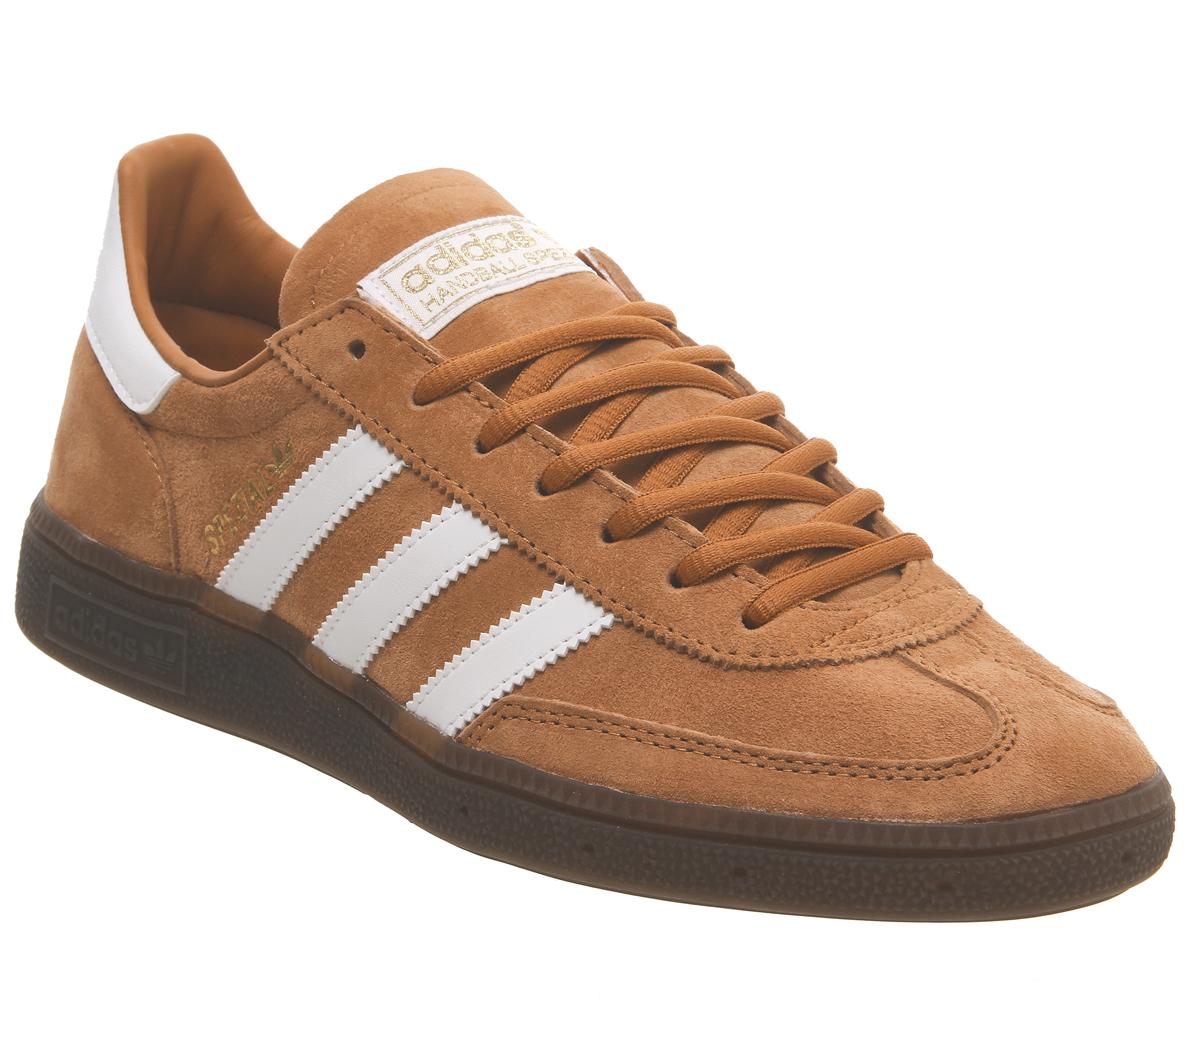 adidas copper trainers